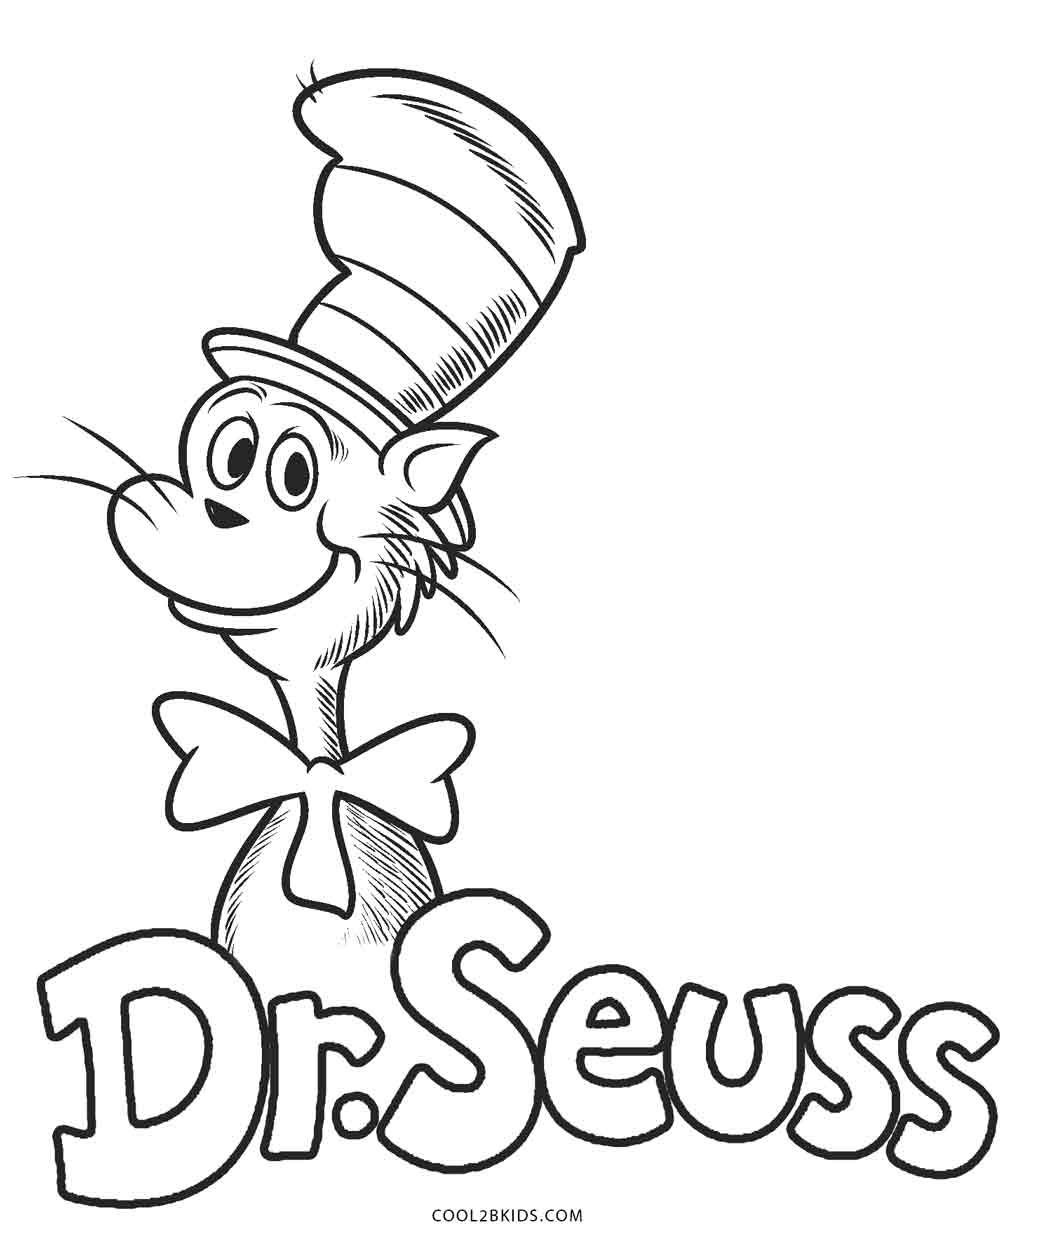 Free Printable Dr Seuss Coloring Pages For Kids | Cool2Bkids - Free Printable Dr Seuss Coloring Pages